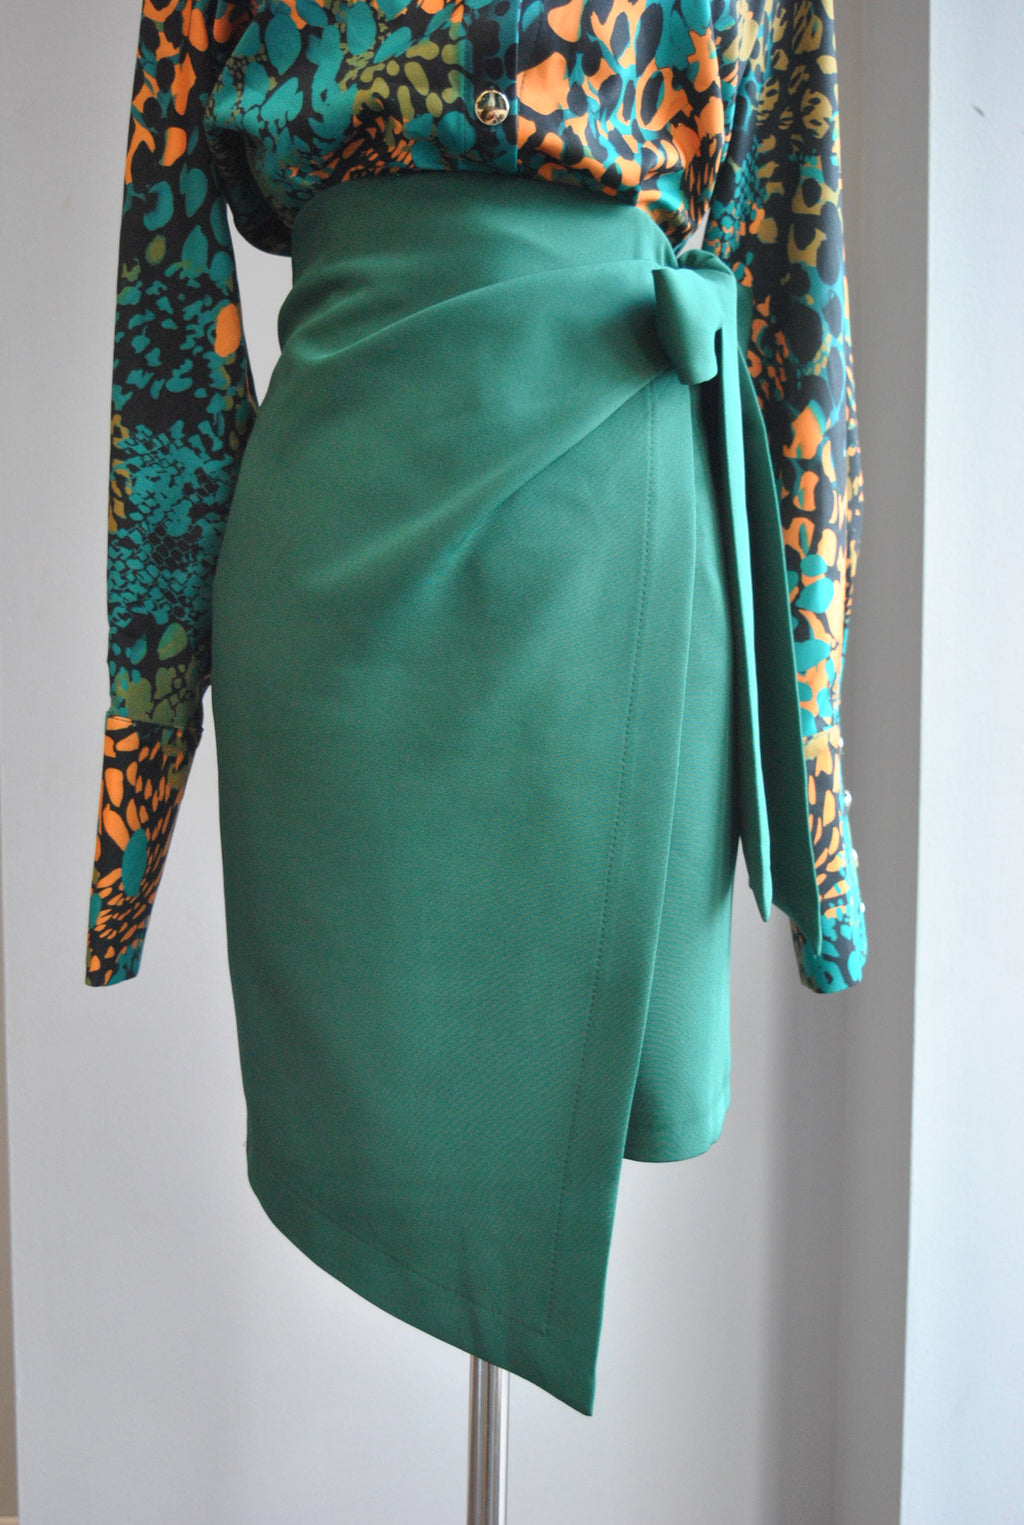 EMERALD GREEN SKIRT WITH SIDE TIE